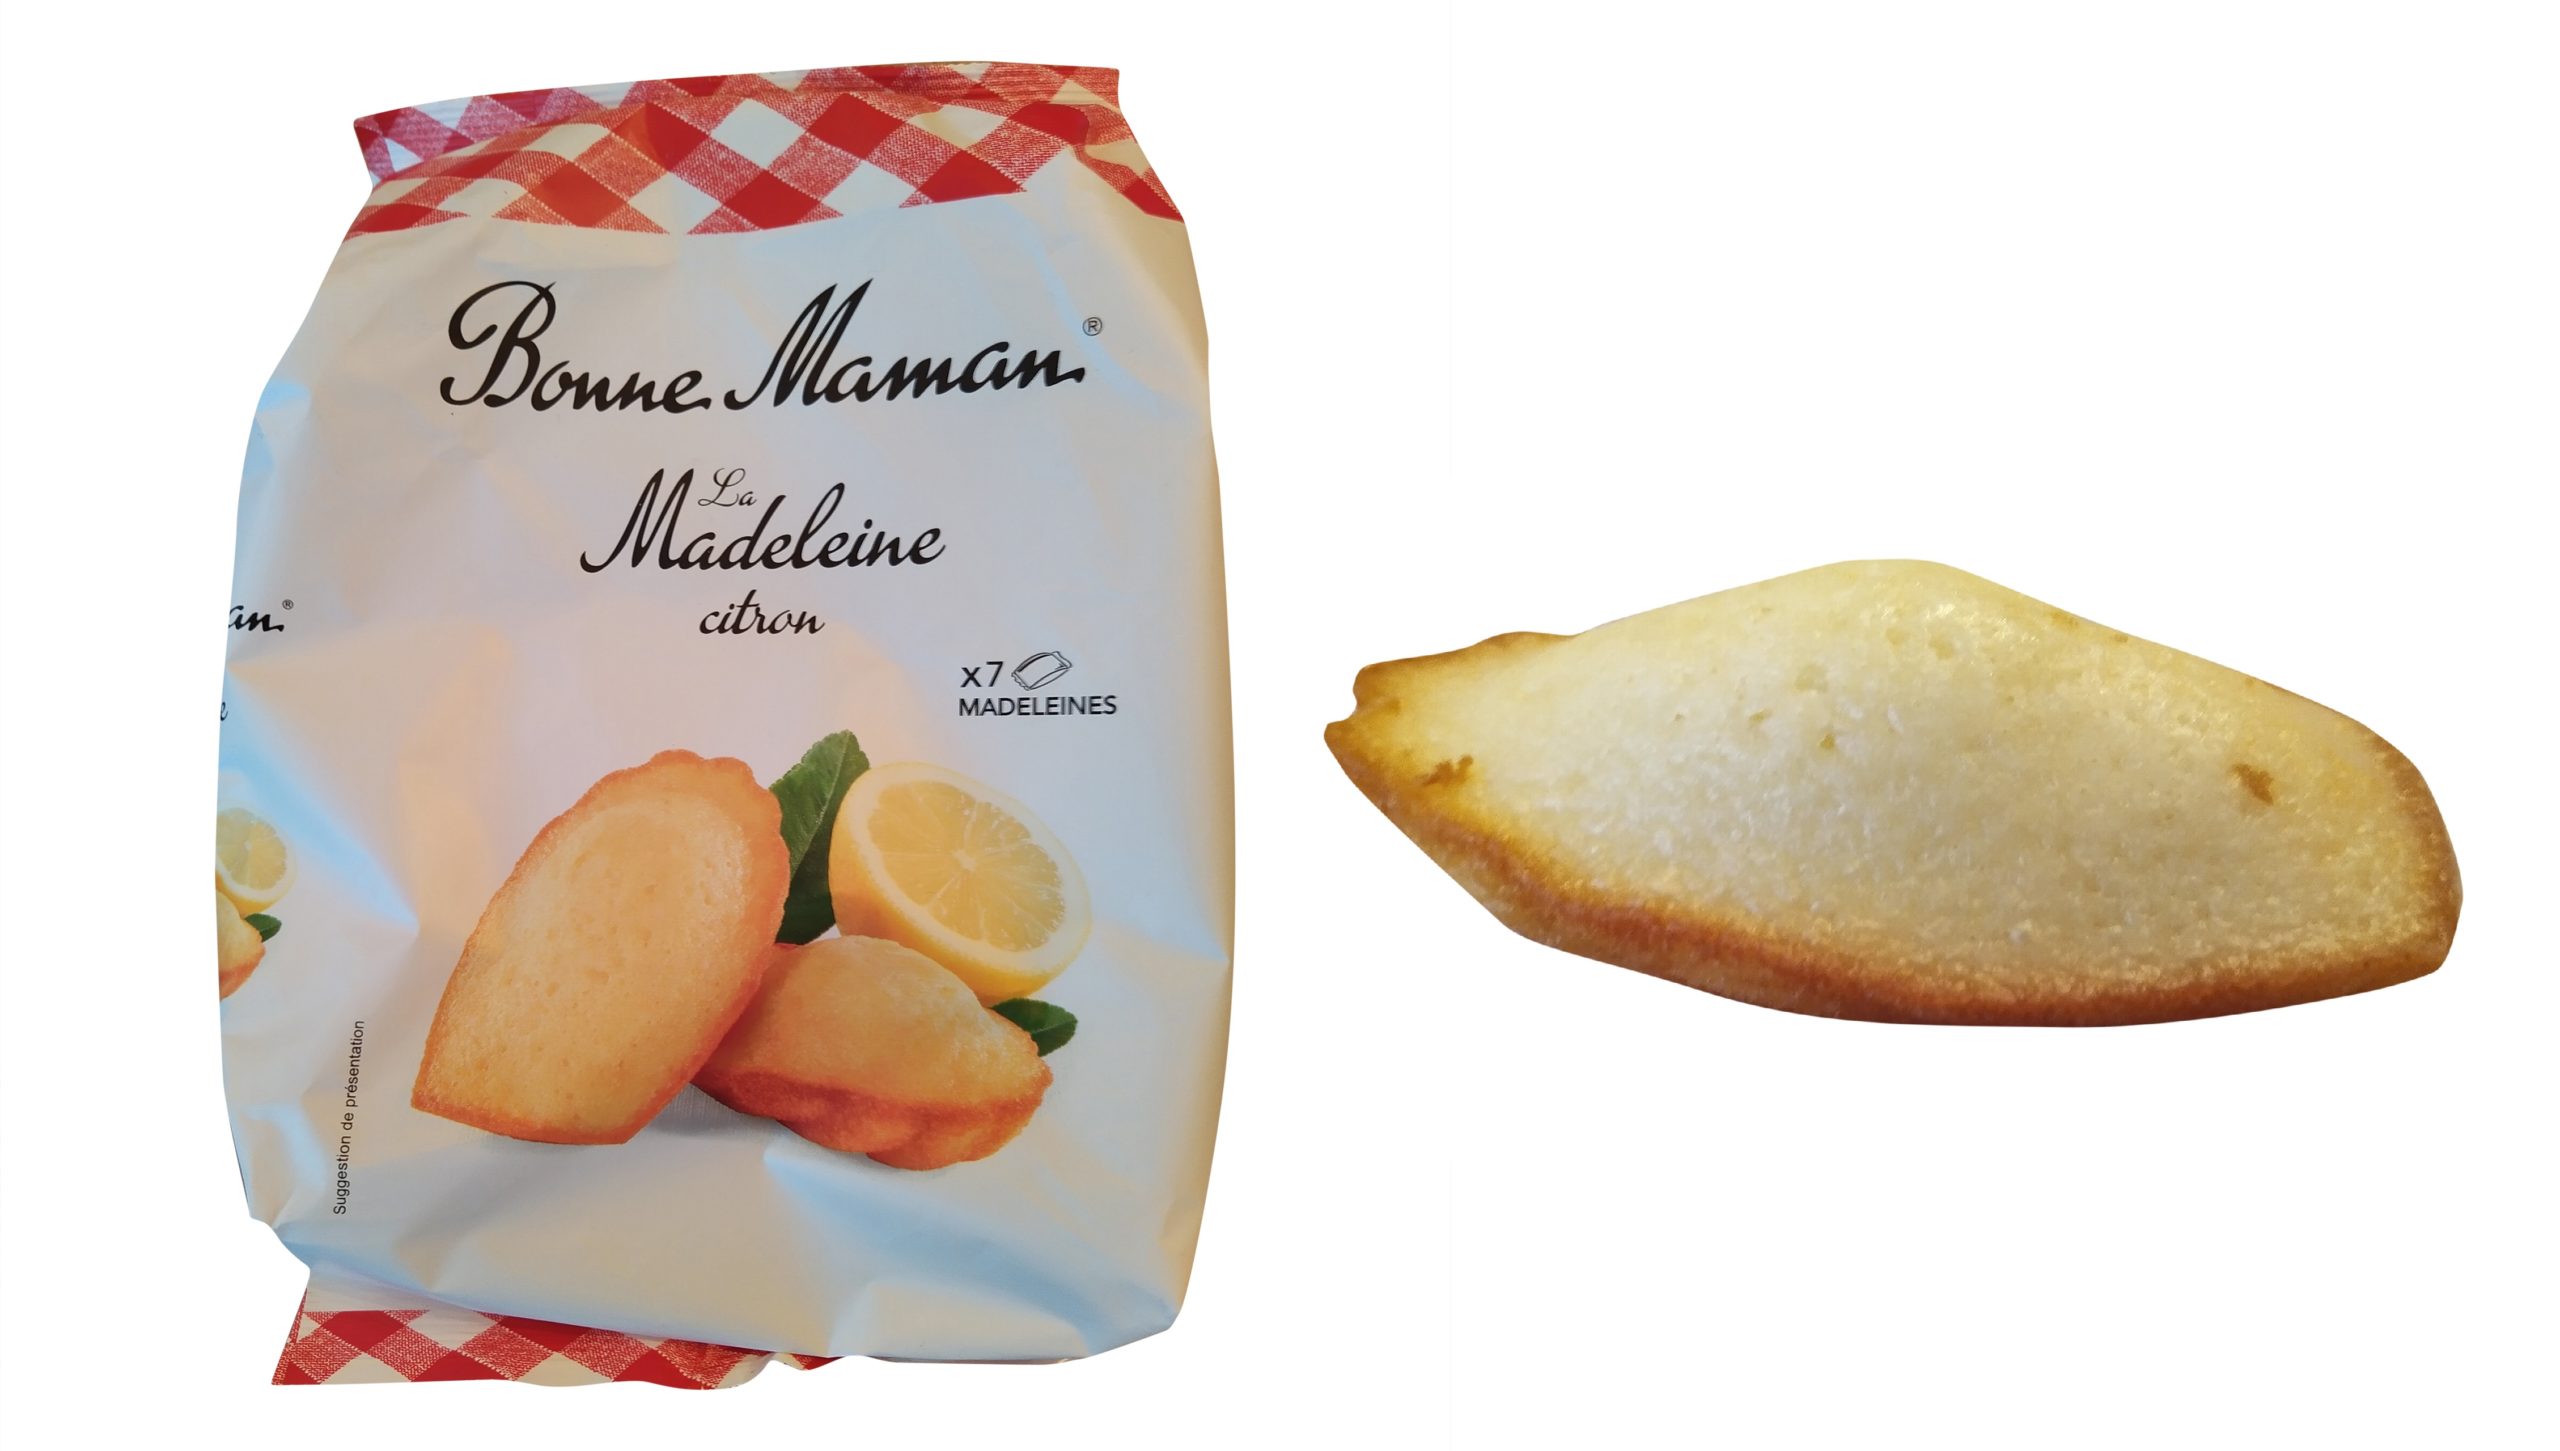 Madeleine Cookies Lemon, French Madeleines Bonne Maman Citron, Madeline  Cookies, Pack of 7 Bonne Maman Madeleines